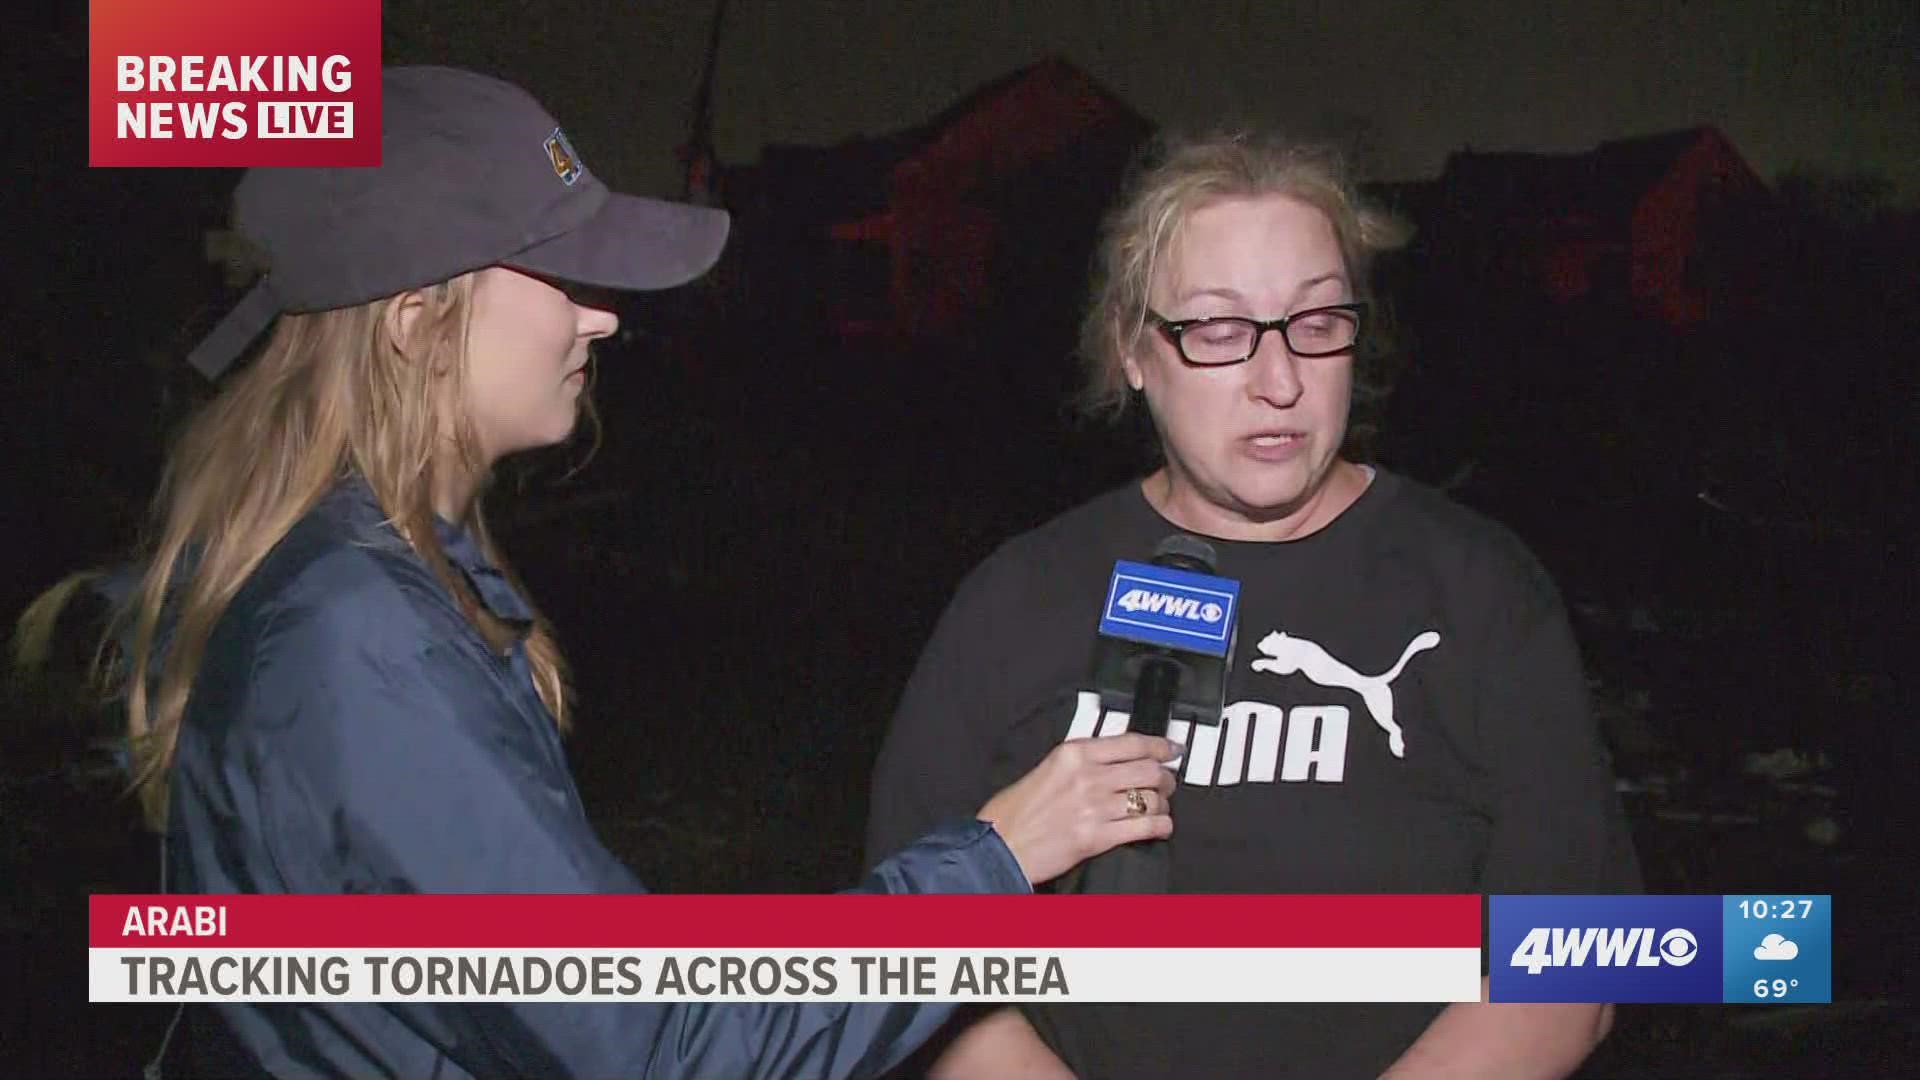 One resident: "I would much rather deal with a hurricane than a tornado."